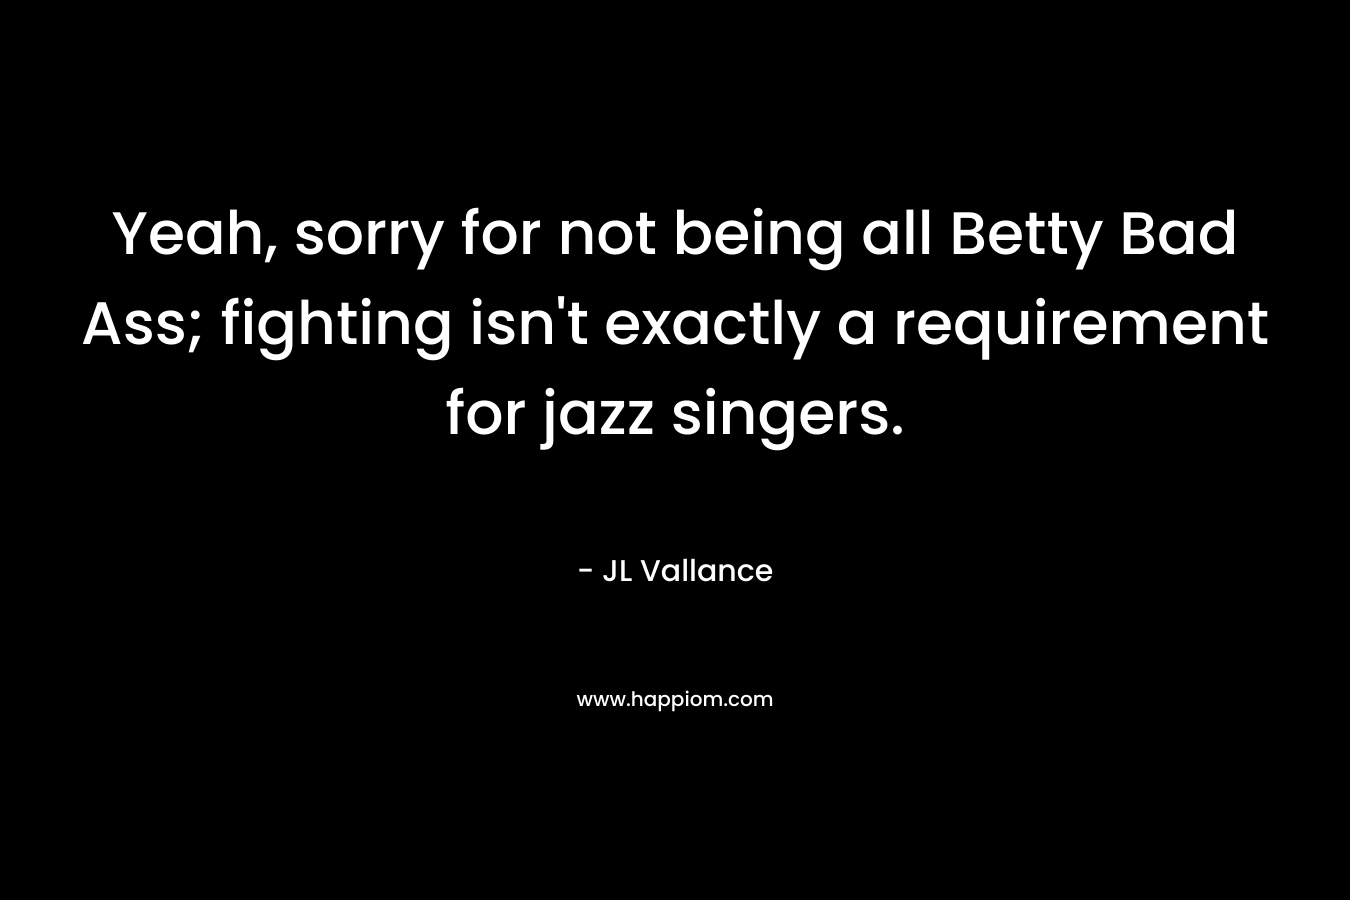 Yeah, sorry for not being all Betty Bad Ass; fighting isn't exactly a requirement for jazz singers.